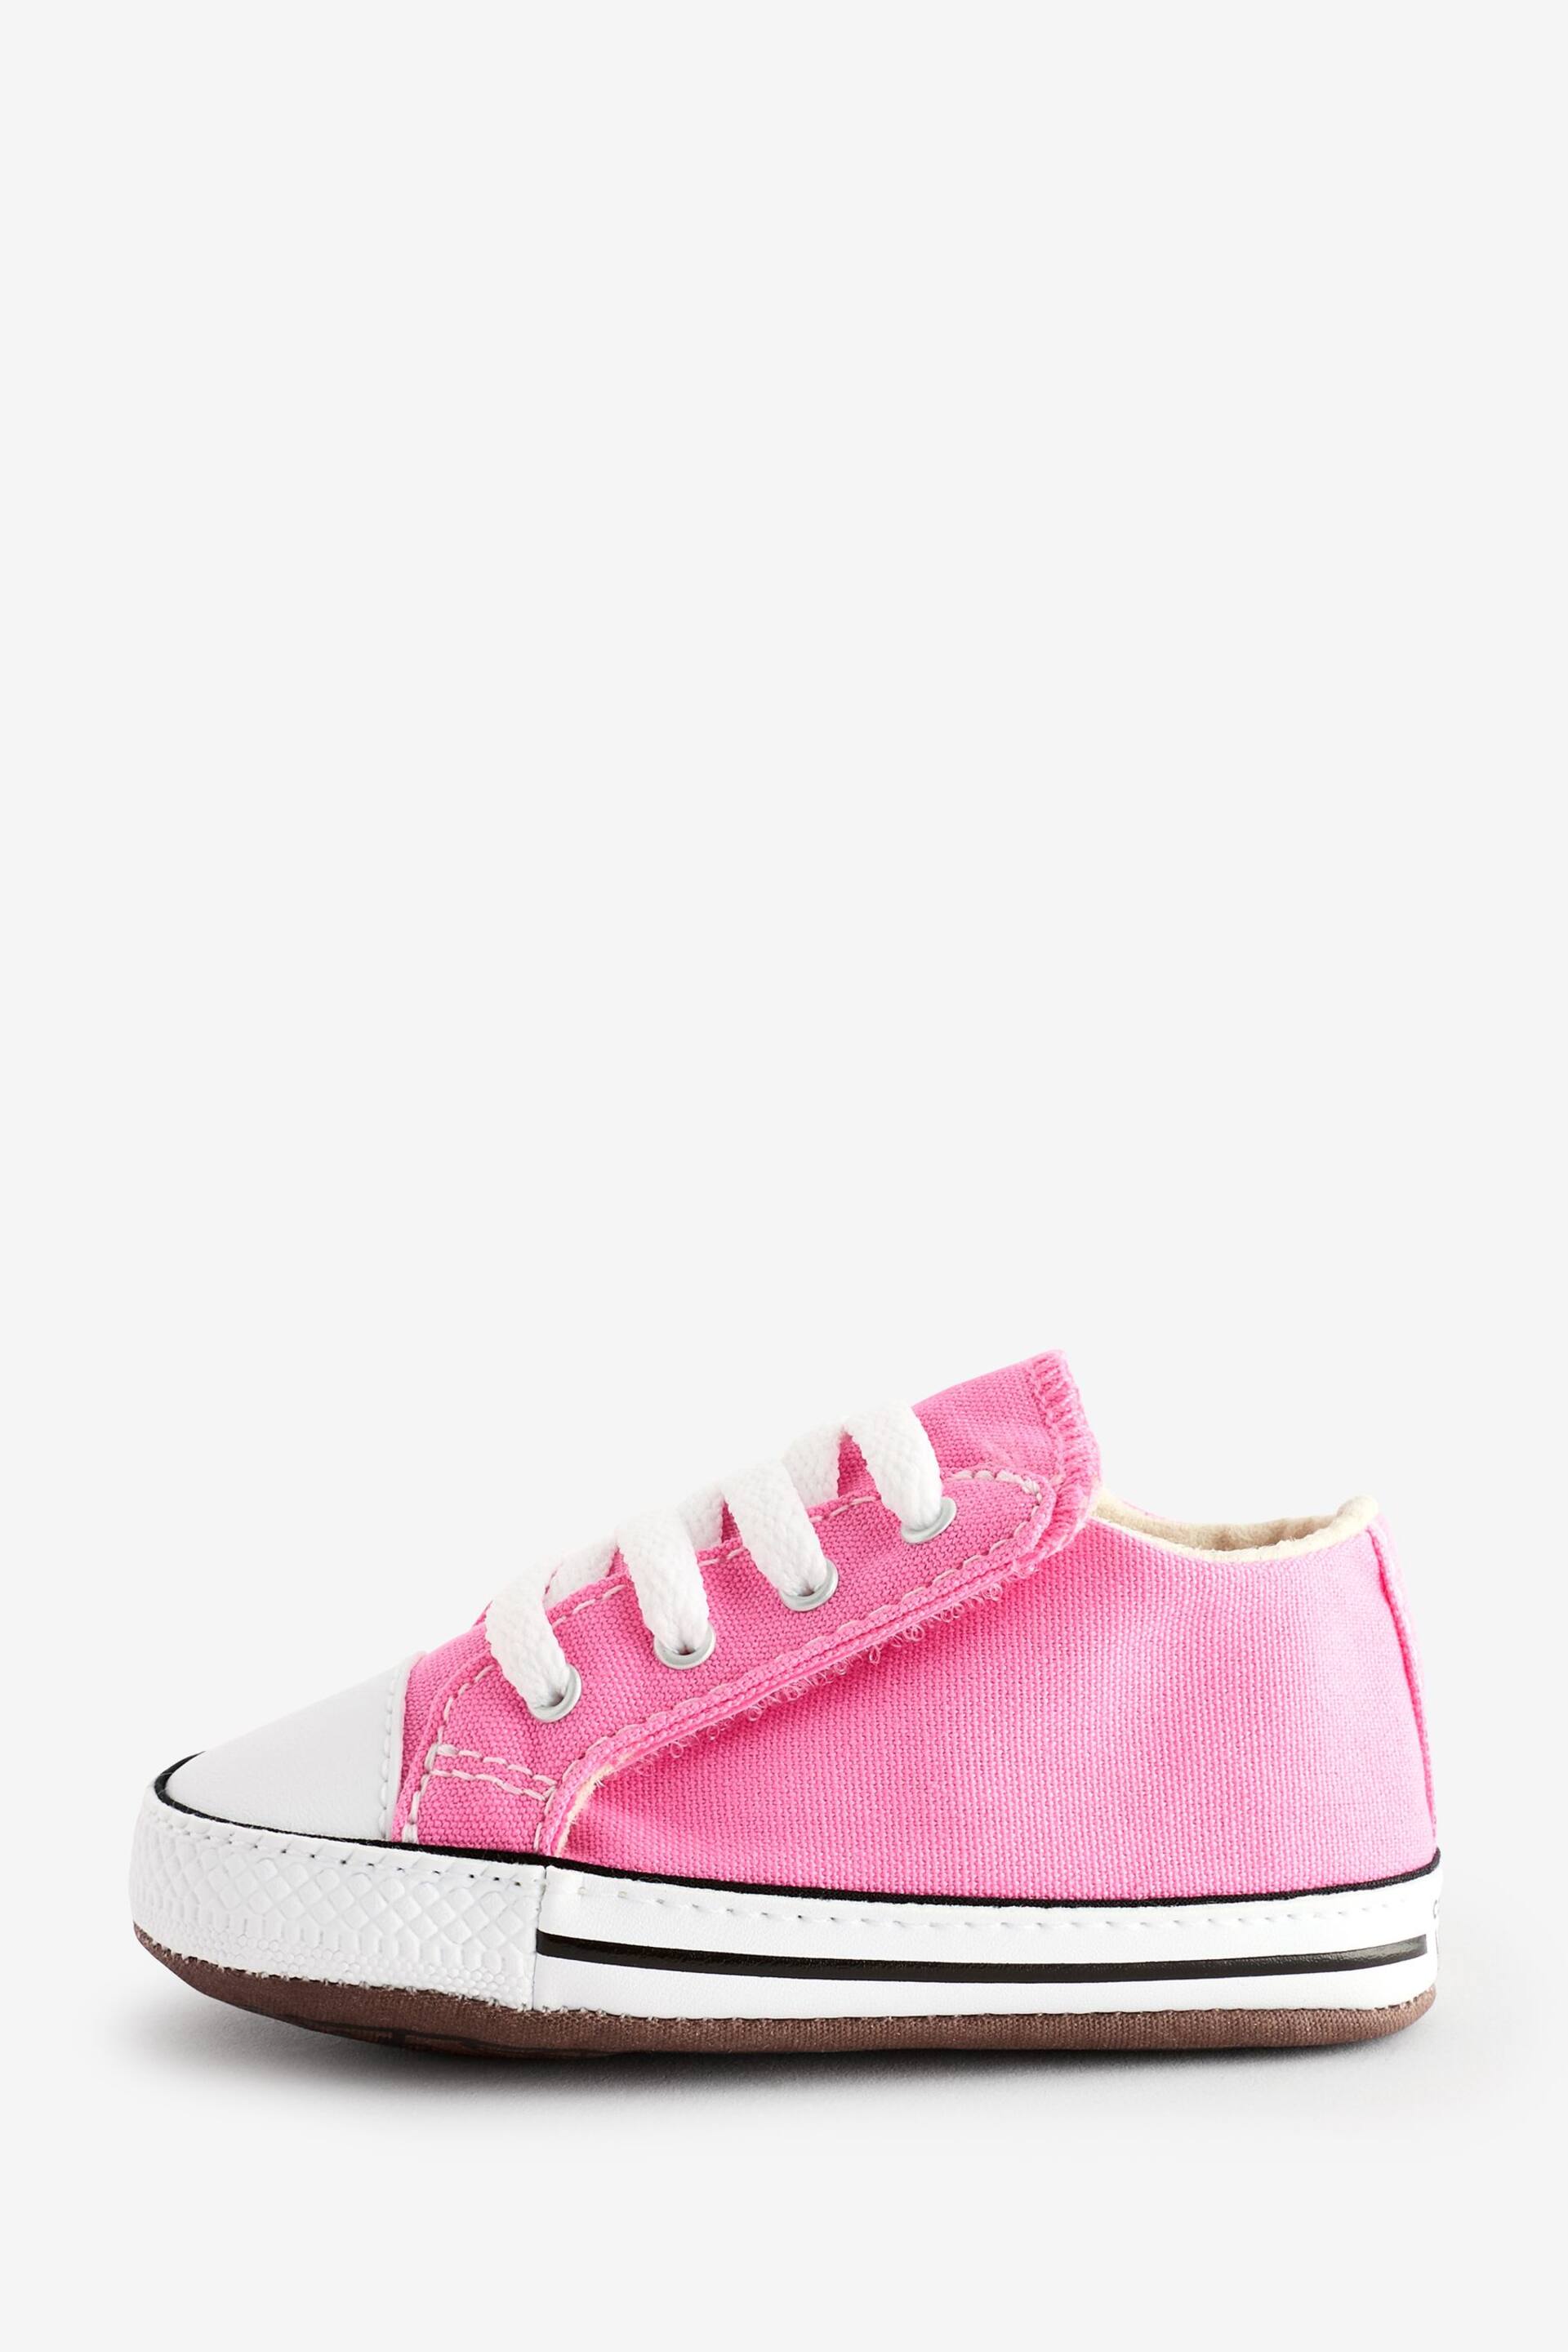 Converse Pink Chuck Taylor All Star Pram Shoes - Image 2 of 9